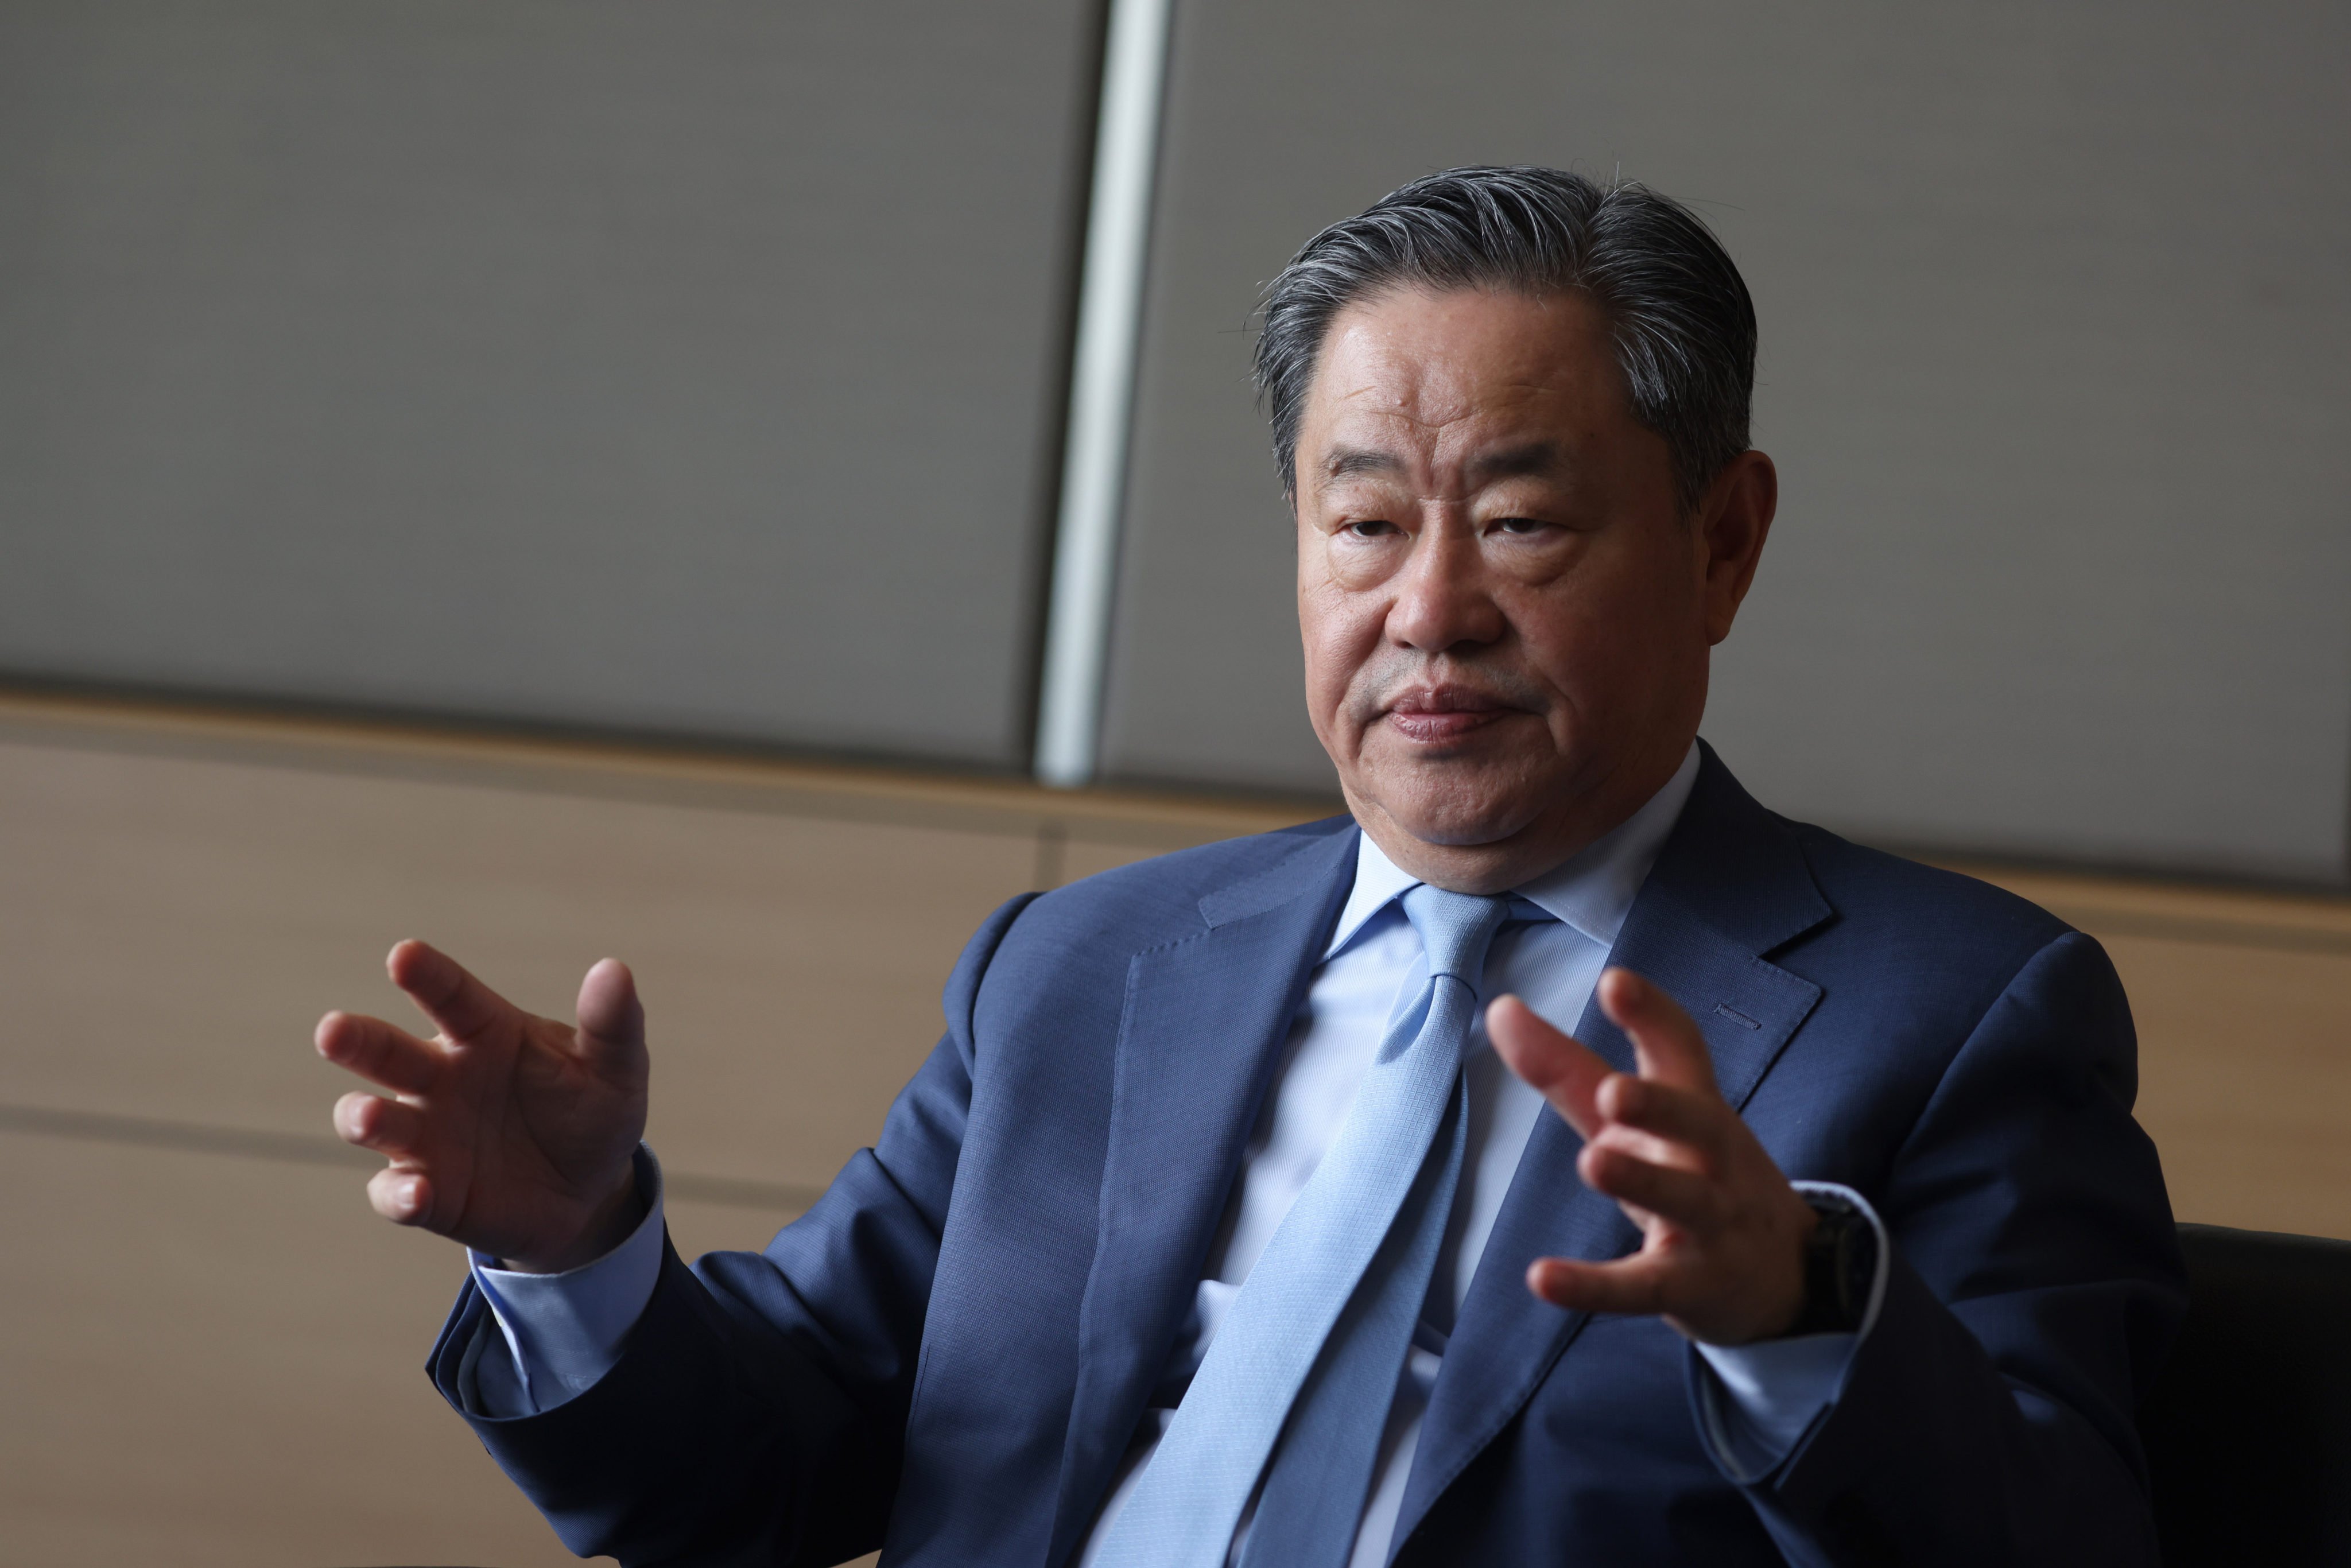 Ning Gaoneng, the head of the Chinese Abac delegation, speaking during an interview at the Business Advisory Council of the Asia-Pacific Economic Cooperation forum (Apec) in Hong Kong on 24 April 2024. Photo: Yik Yeung-man